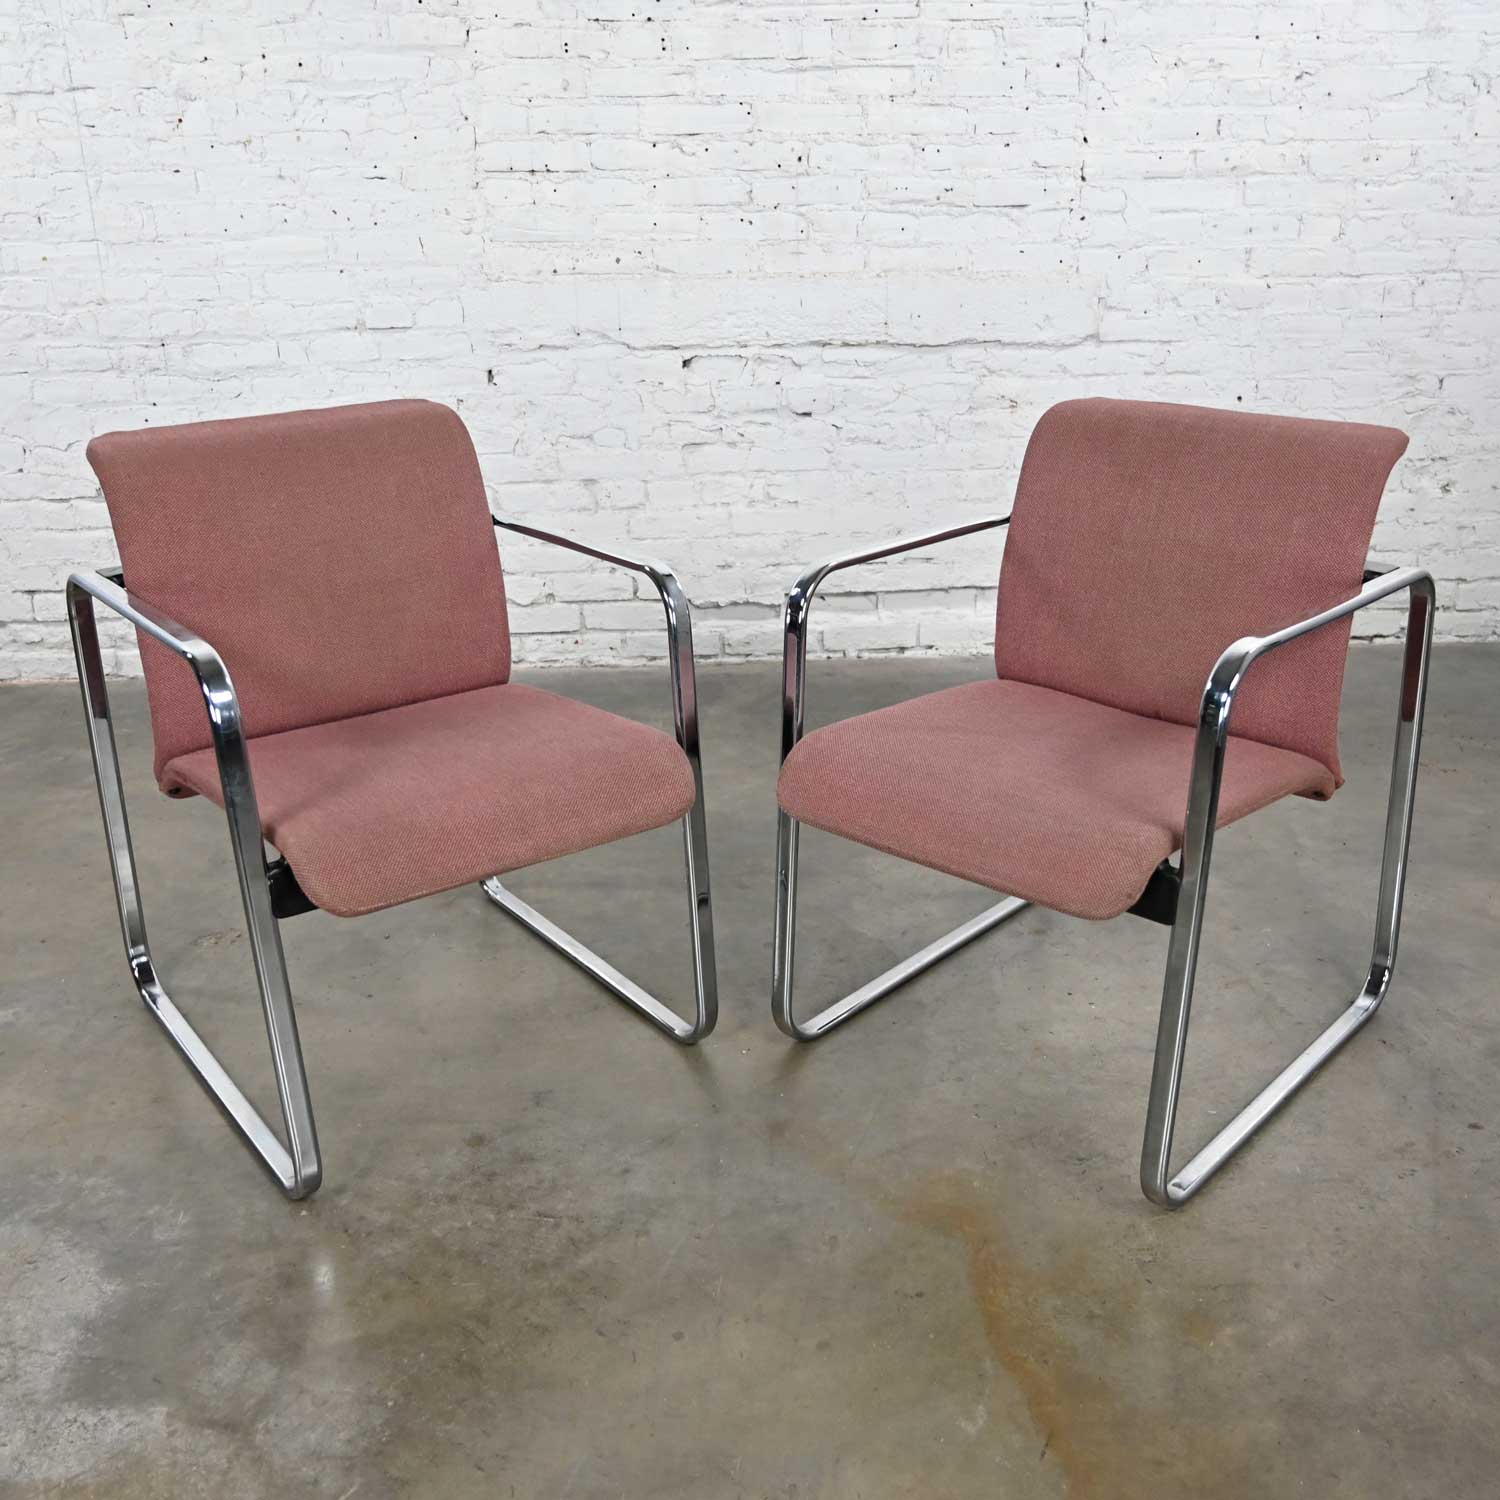 Vintage MCM Mauve Hopsacking & Chrome Tubular Chairs by Peter Protzman for Herman Miller